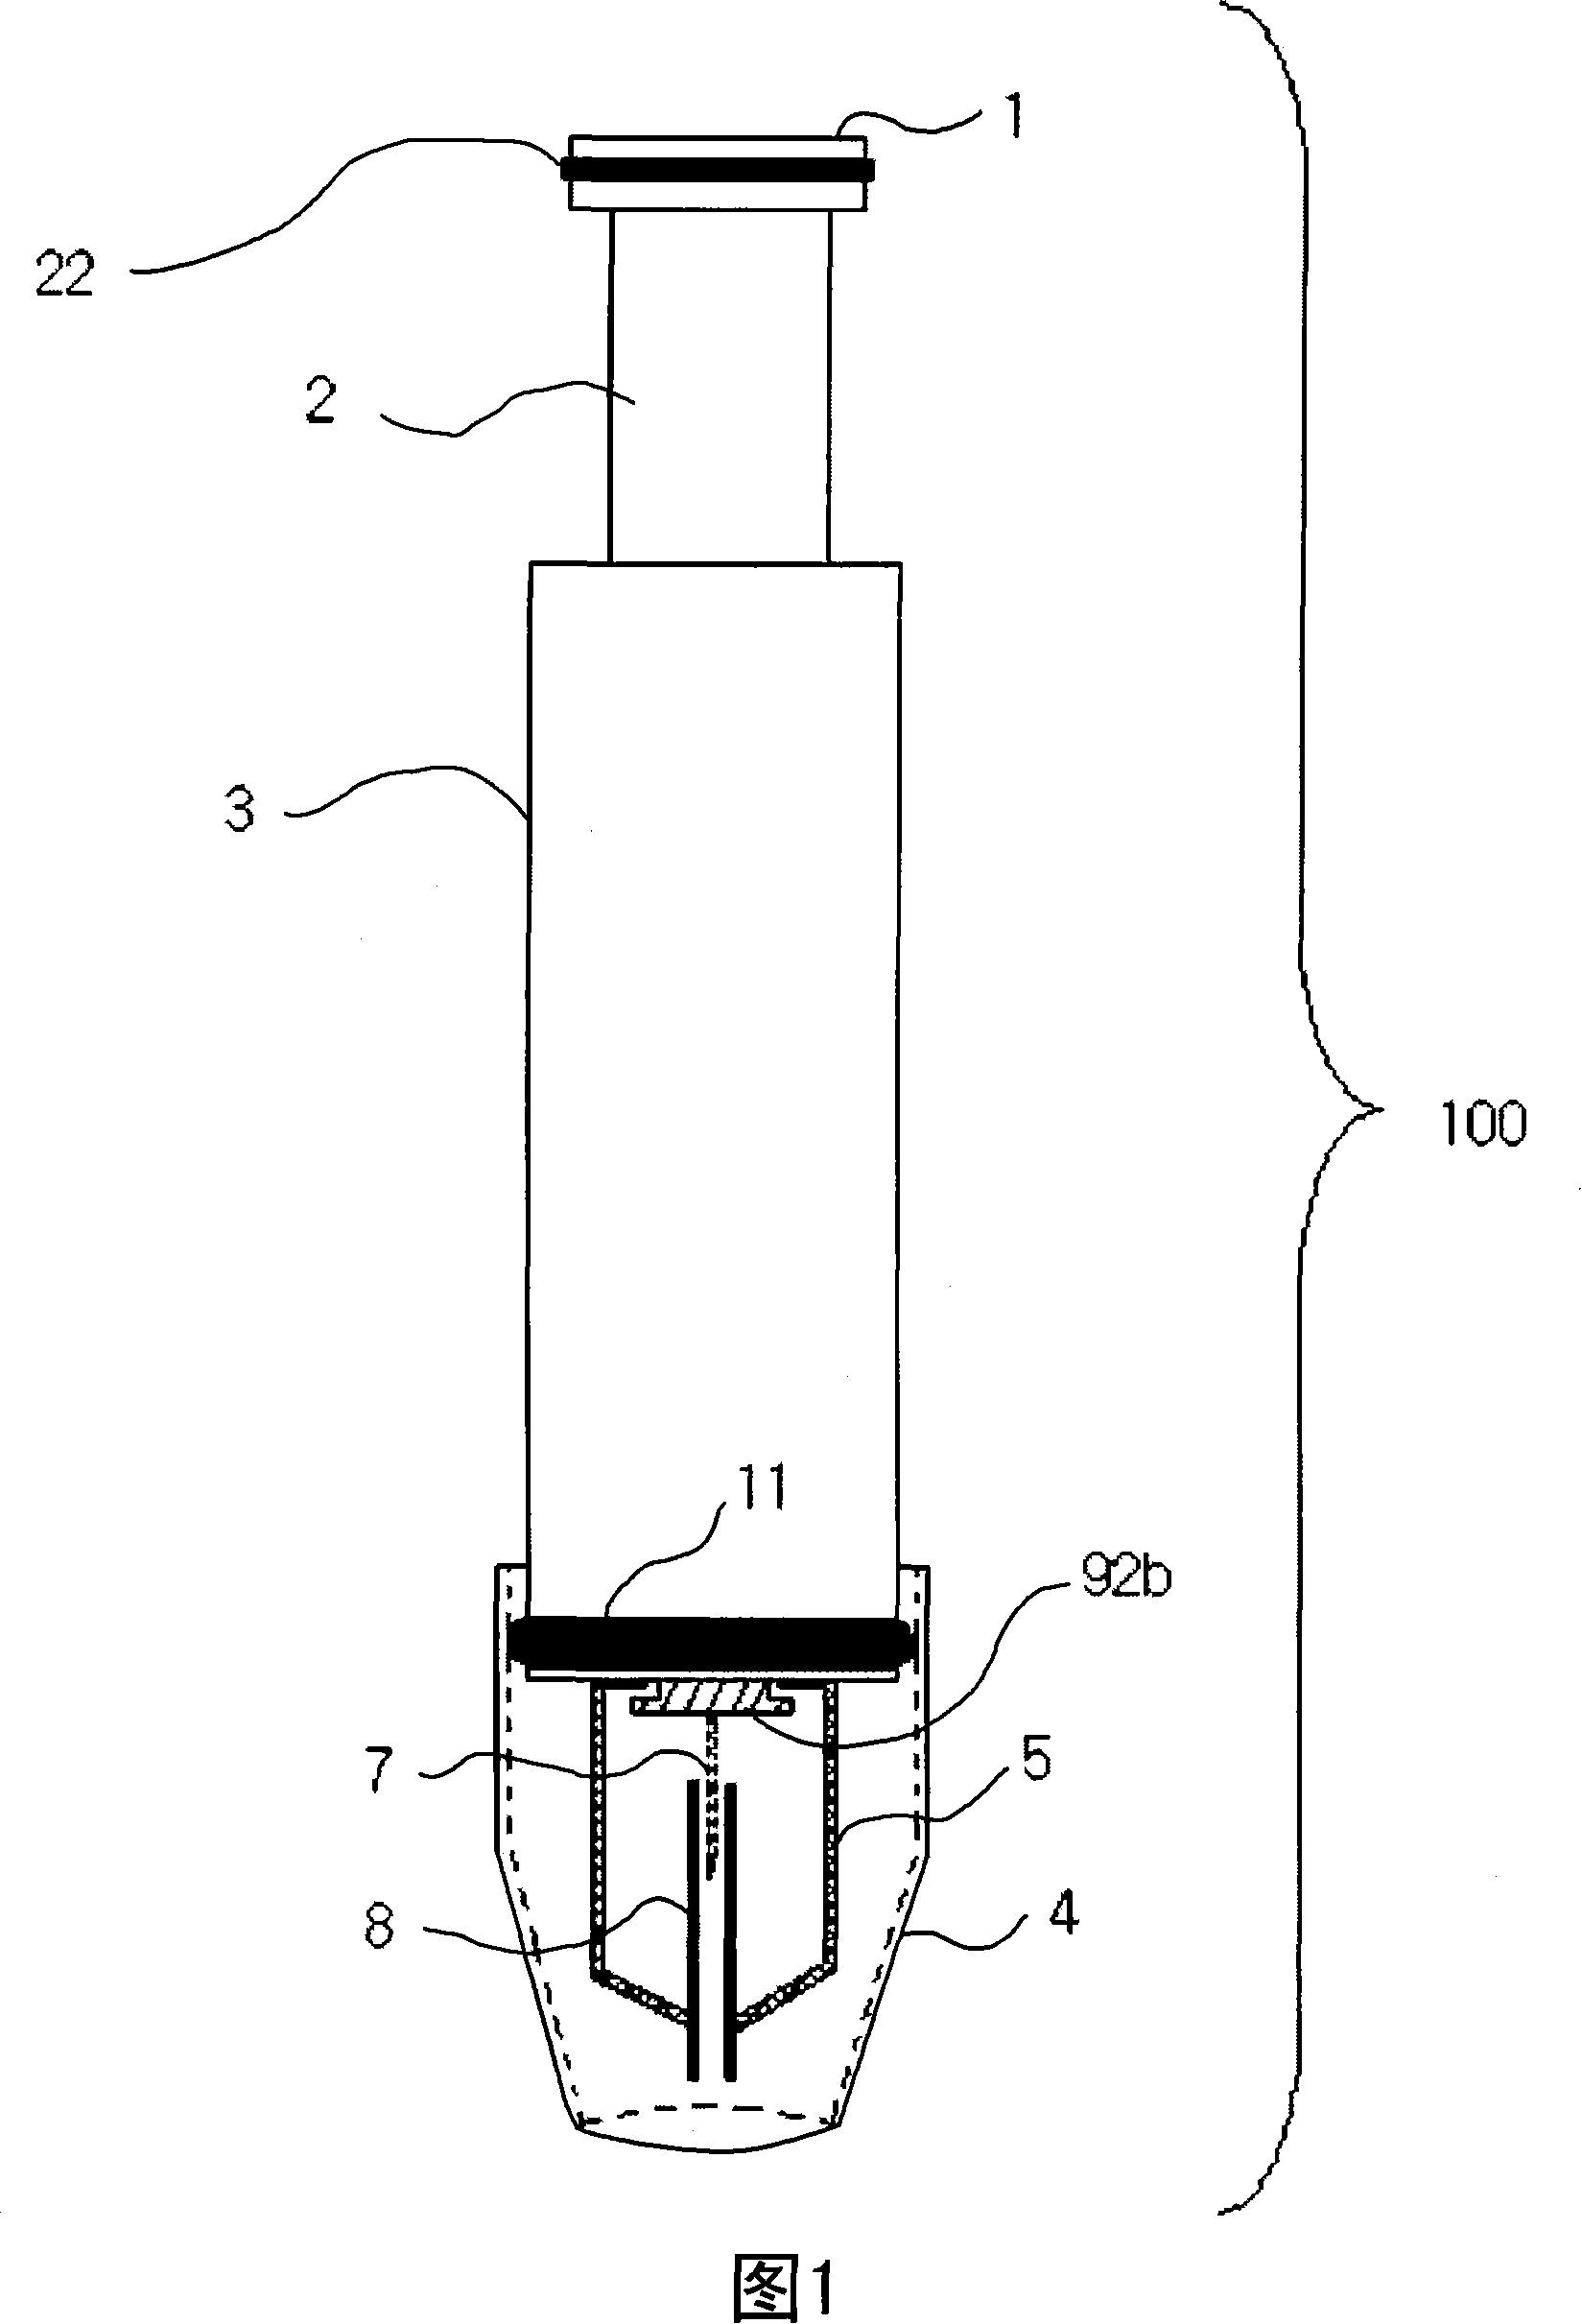 Lancet device and method for sampling and injecting blood using the lancet device